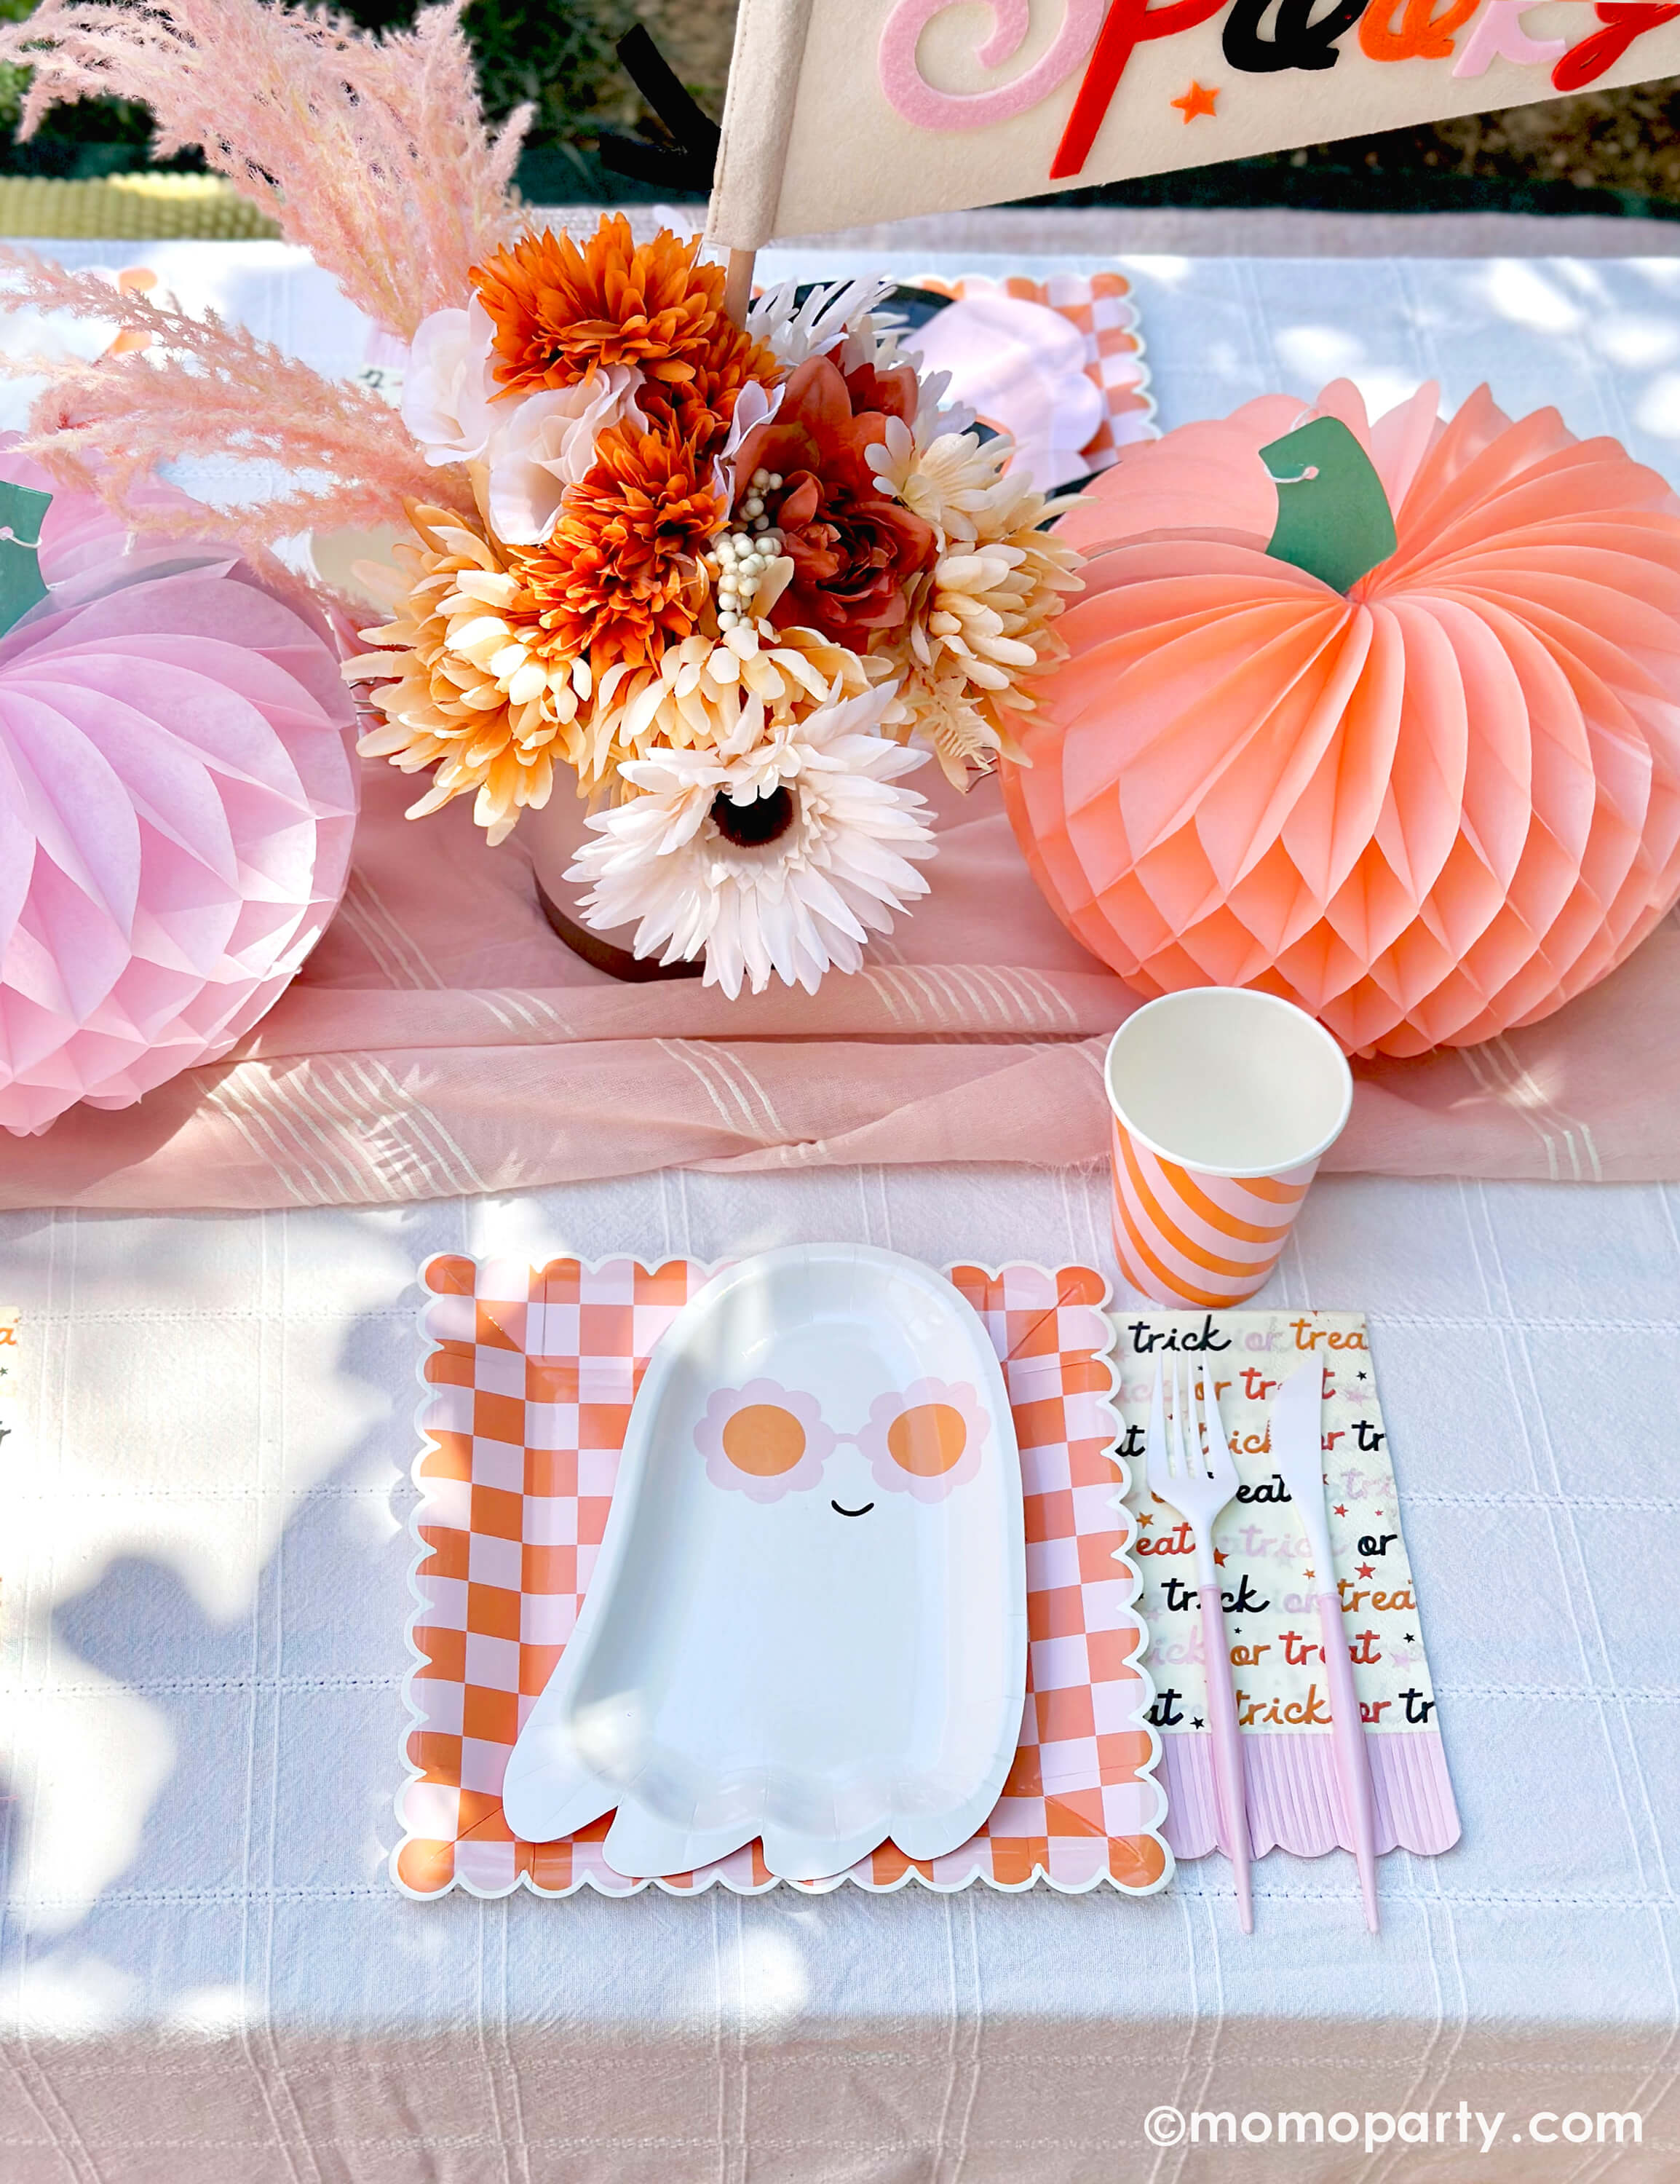 A pink Halloween table featuring Momo Party's pink sunny ghost shaped plates paired with orange/pink checkered plates, with boho vibe fall flower arrangement and pastel peach and pink honeycomb pumpkins as the centerpiece, and a felt party pennant that has "spooky" written on, this tablescape gives a great inspiration for a modern and chic Halloween party table decoration ideas.